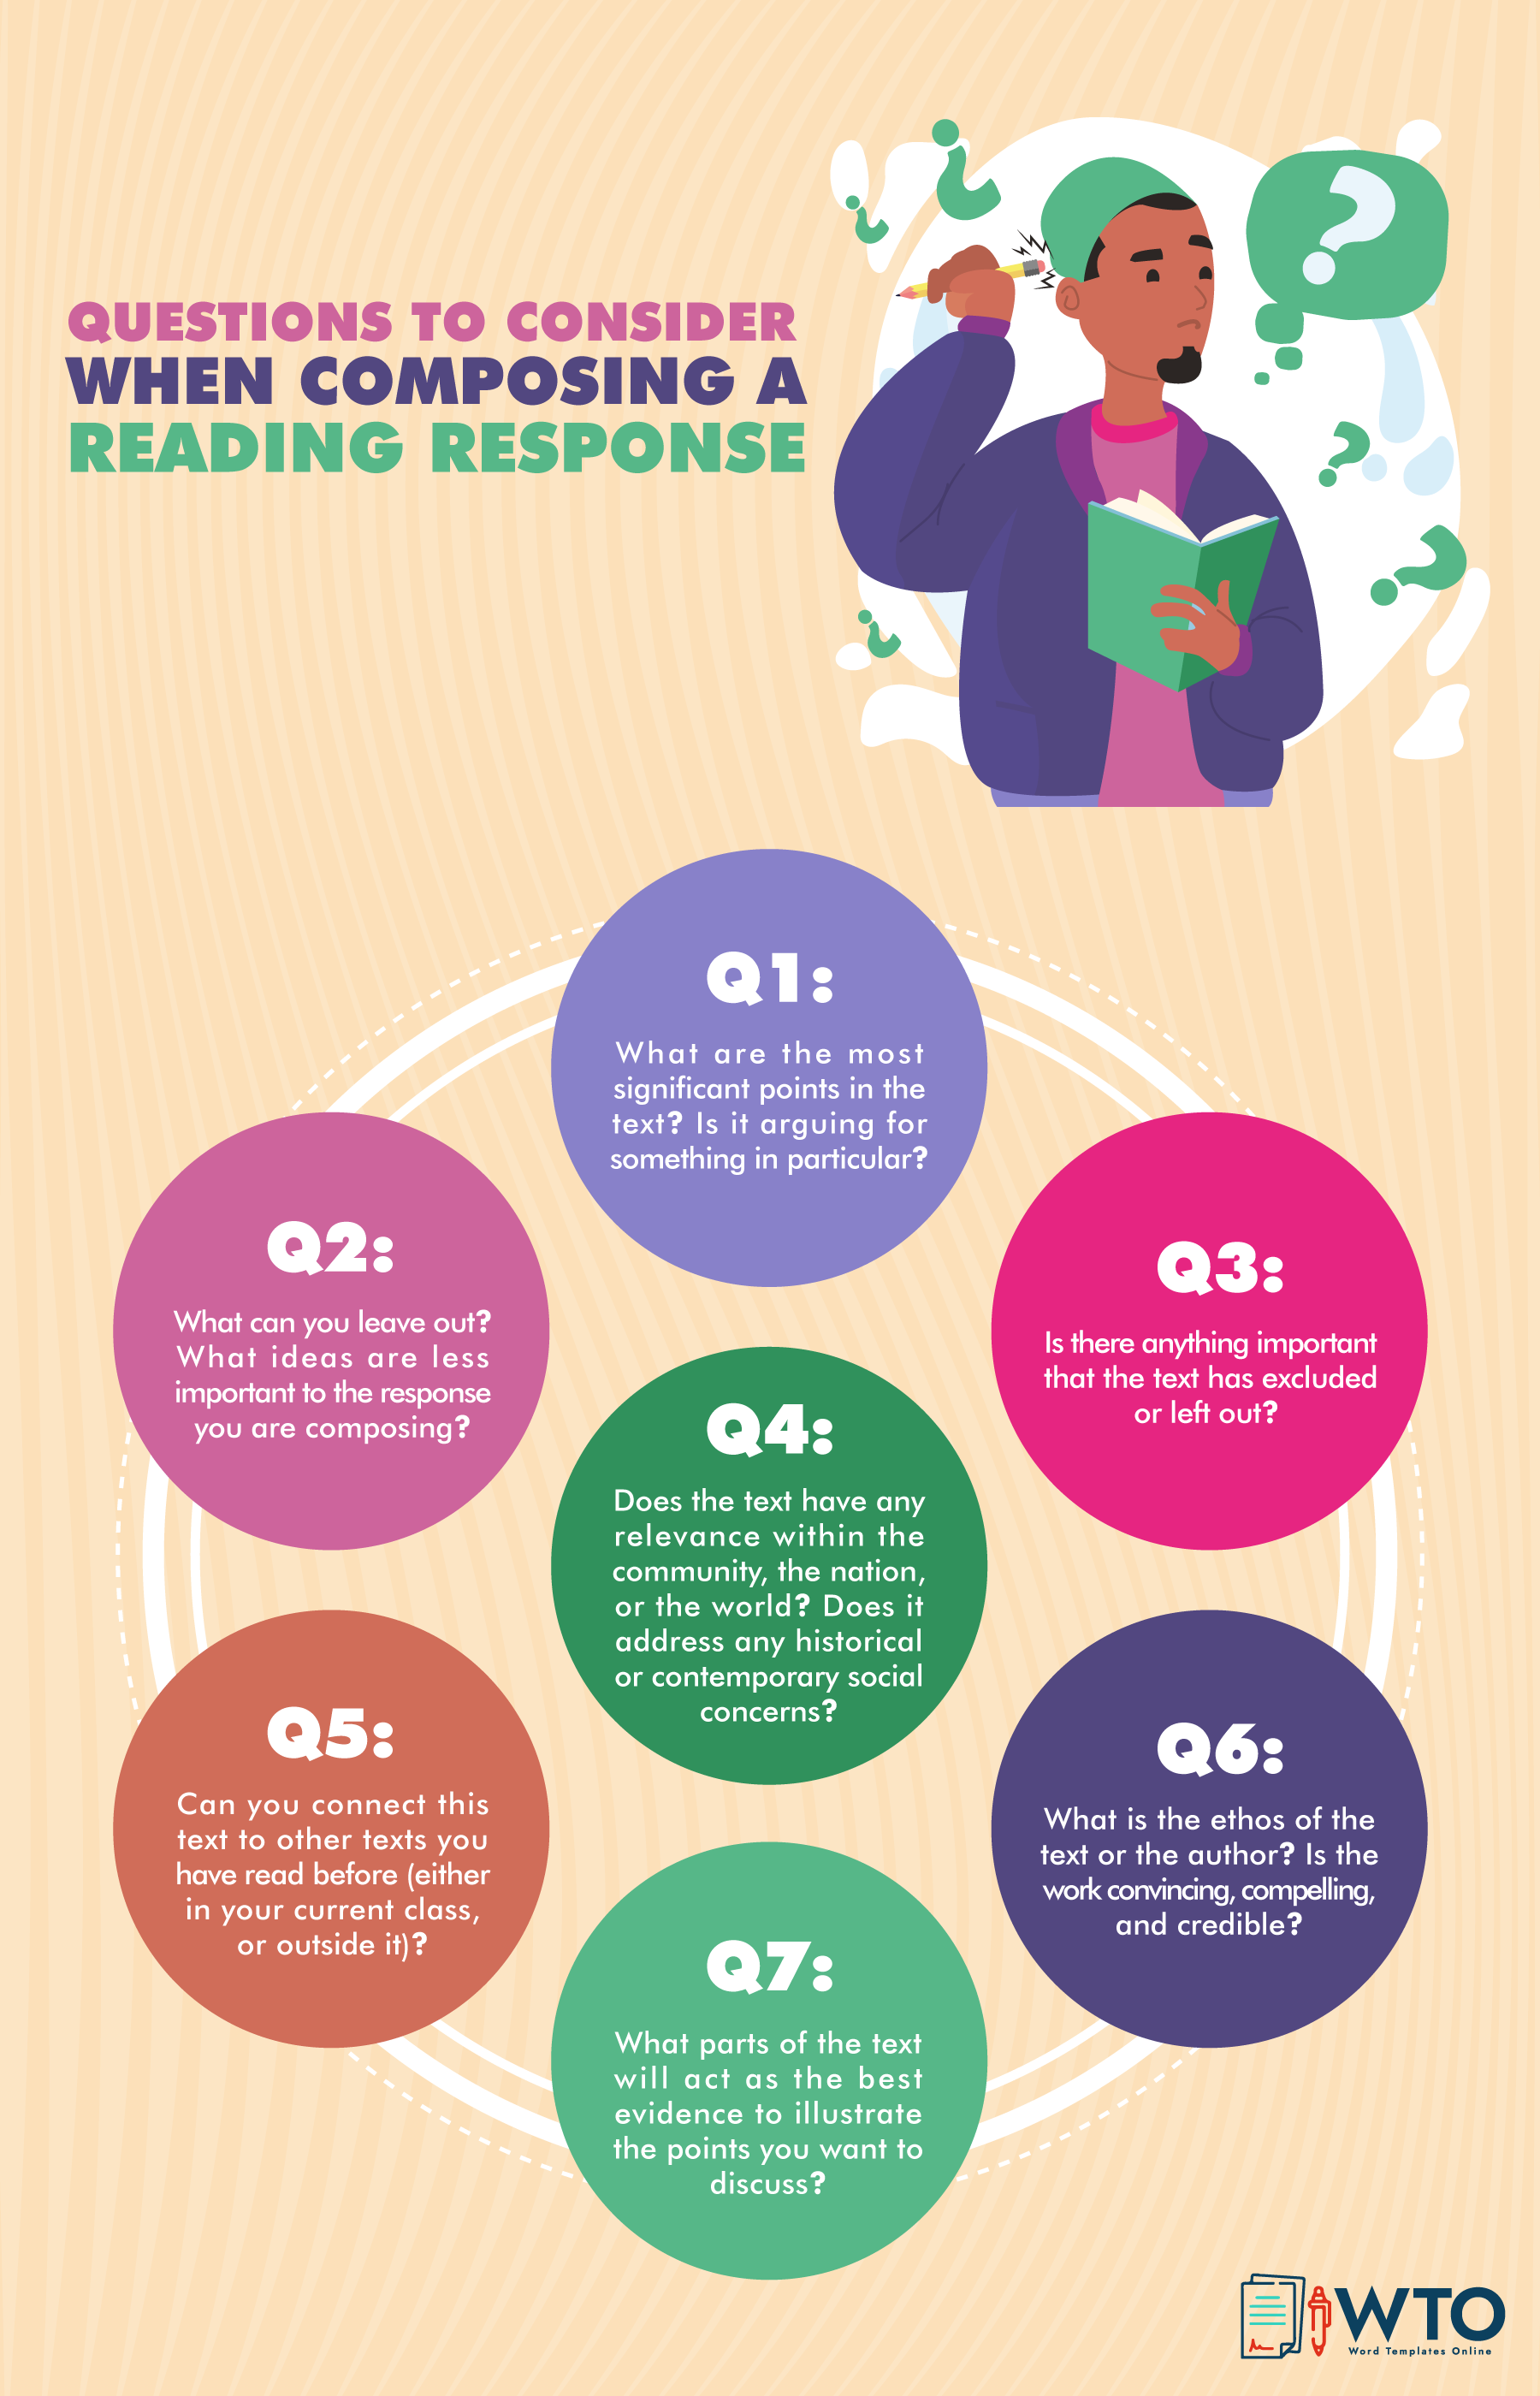 This infographic is about questions for  reading response composition.